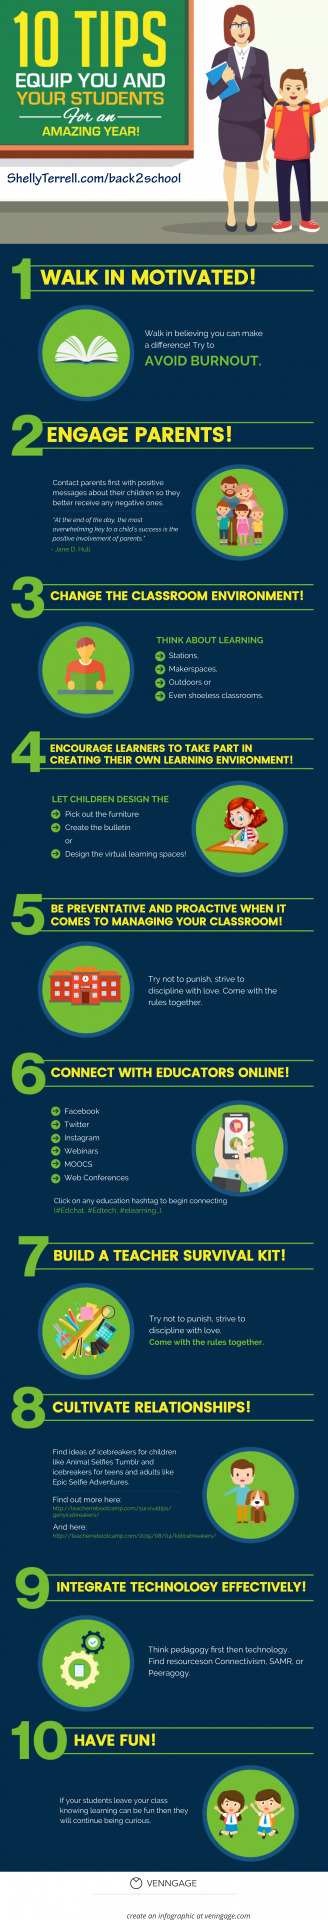 Infographic! 10 Back to School Tips for an Awesome Year! – Shelly Terrell | iGeneration - 21st Century Education (Pedagogy & Digital Innovation) | Scoop.it